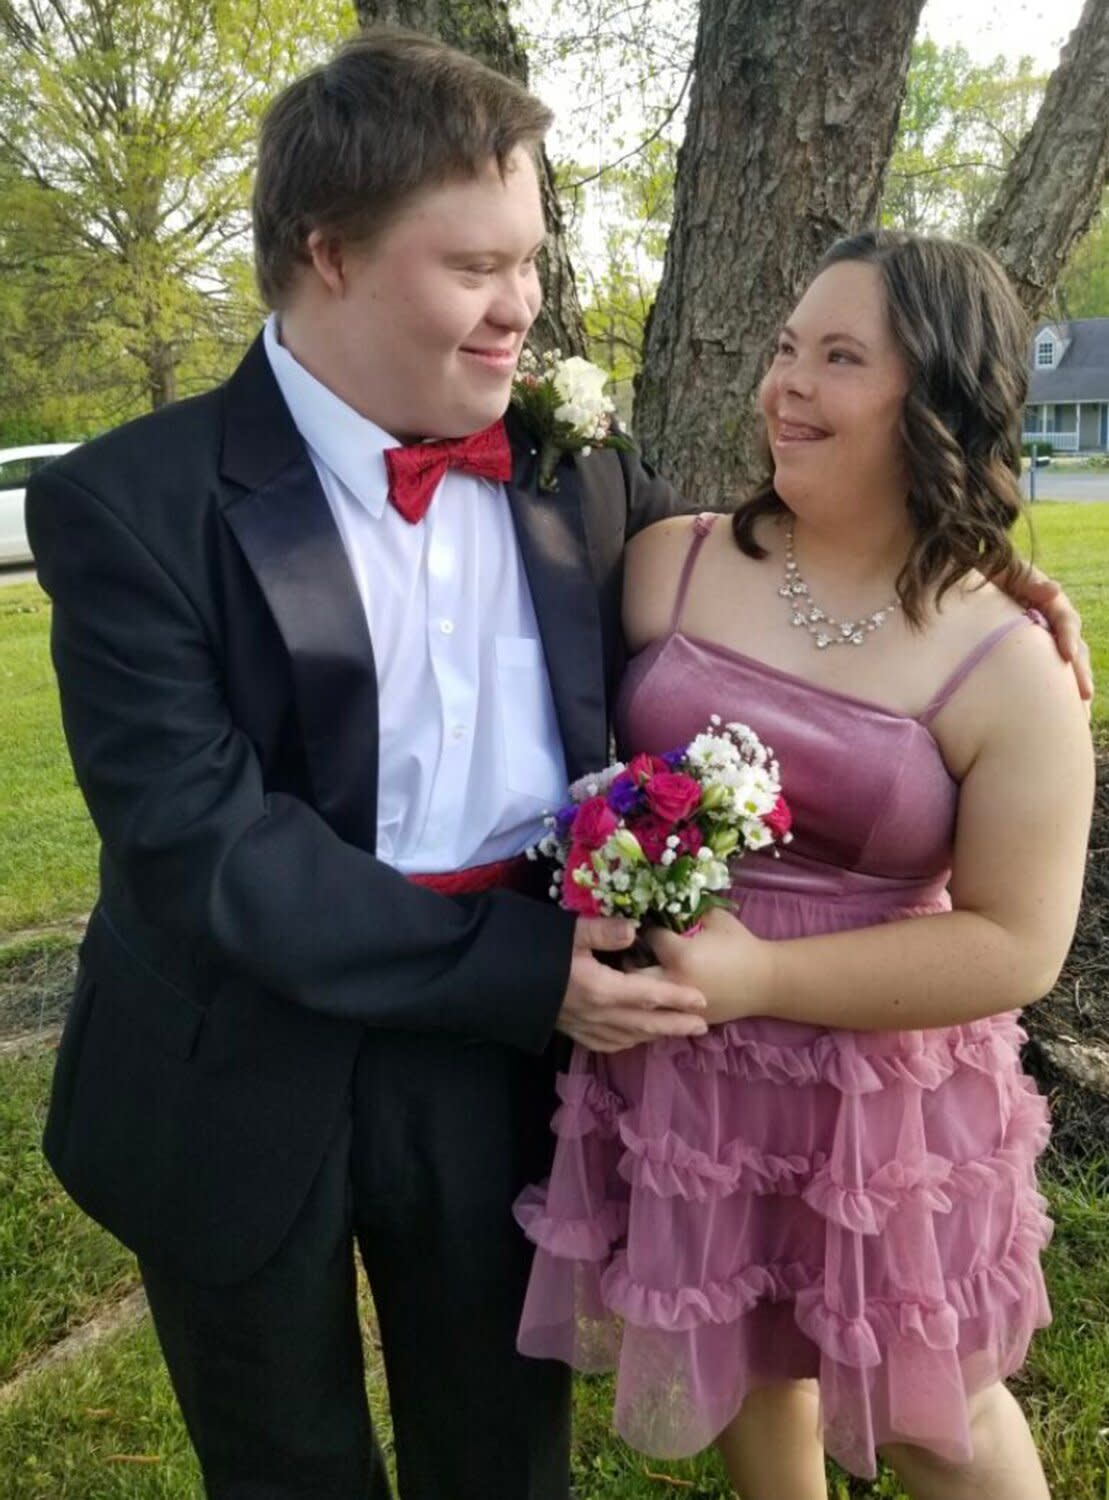 Anna Anderson and Zane Wales, students with Down Syndrome crowned prom king and queen